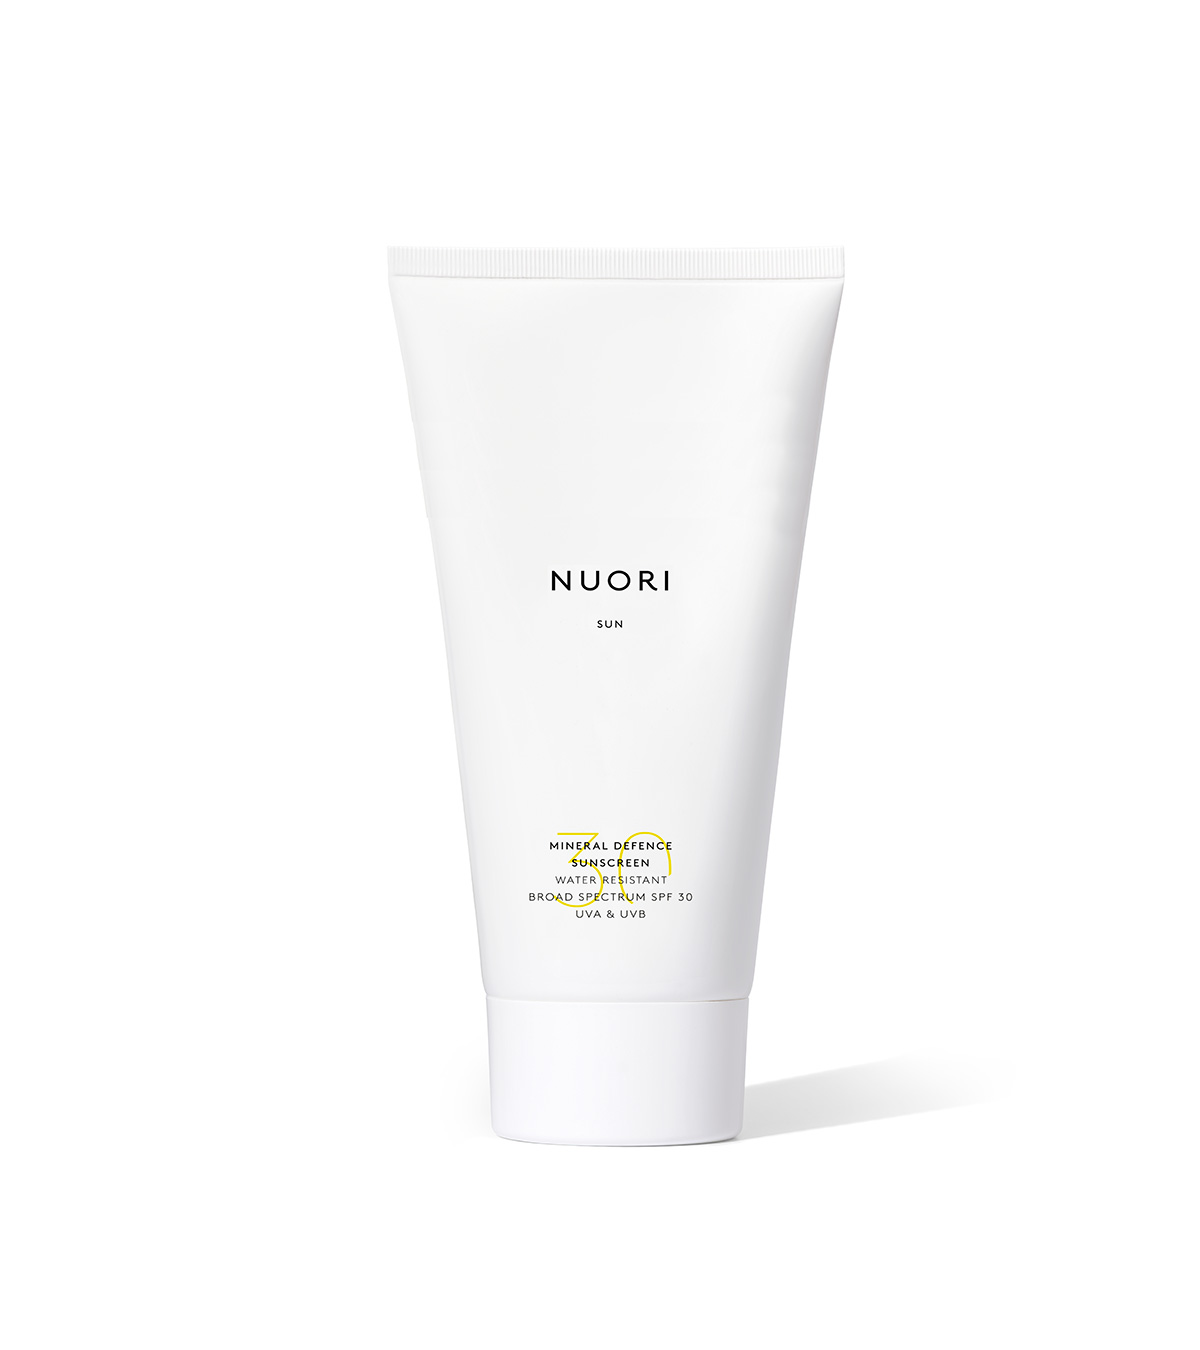 Mineral Defence Sunscreen Water Resistant SPF30, NUORI | Meka.sk